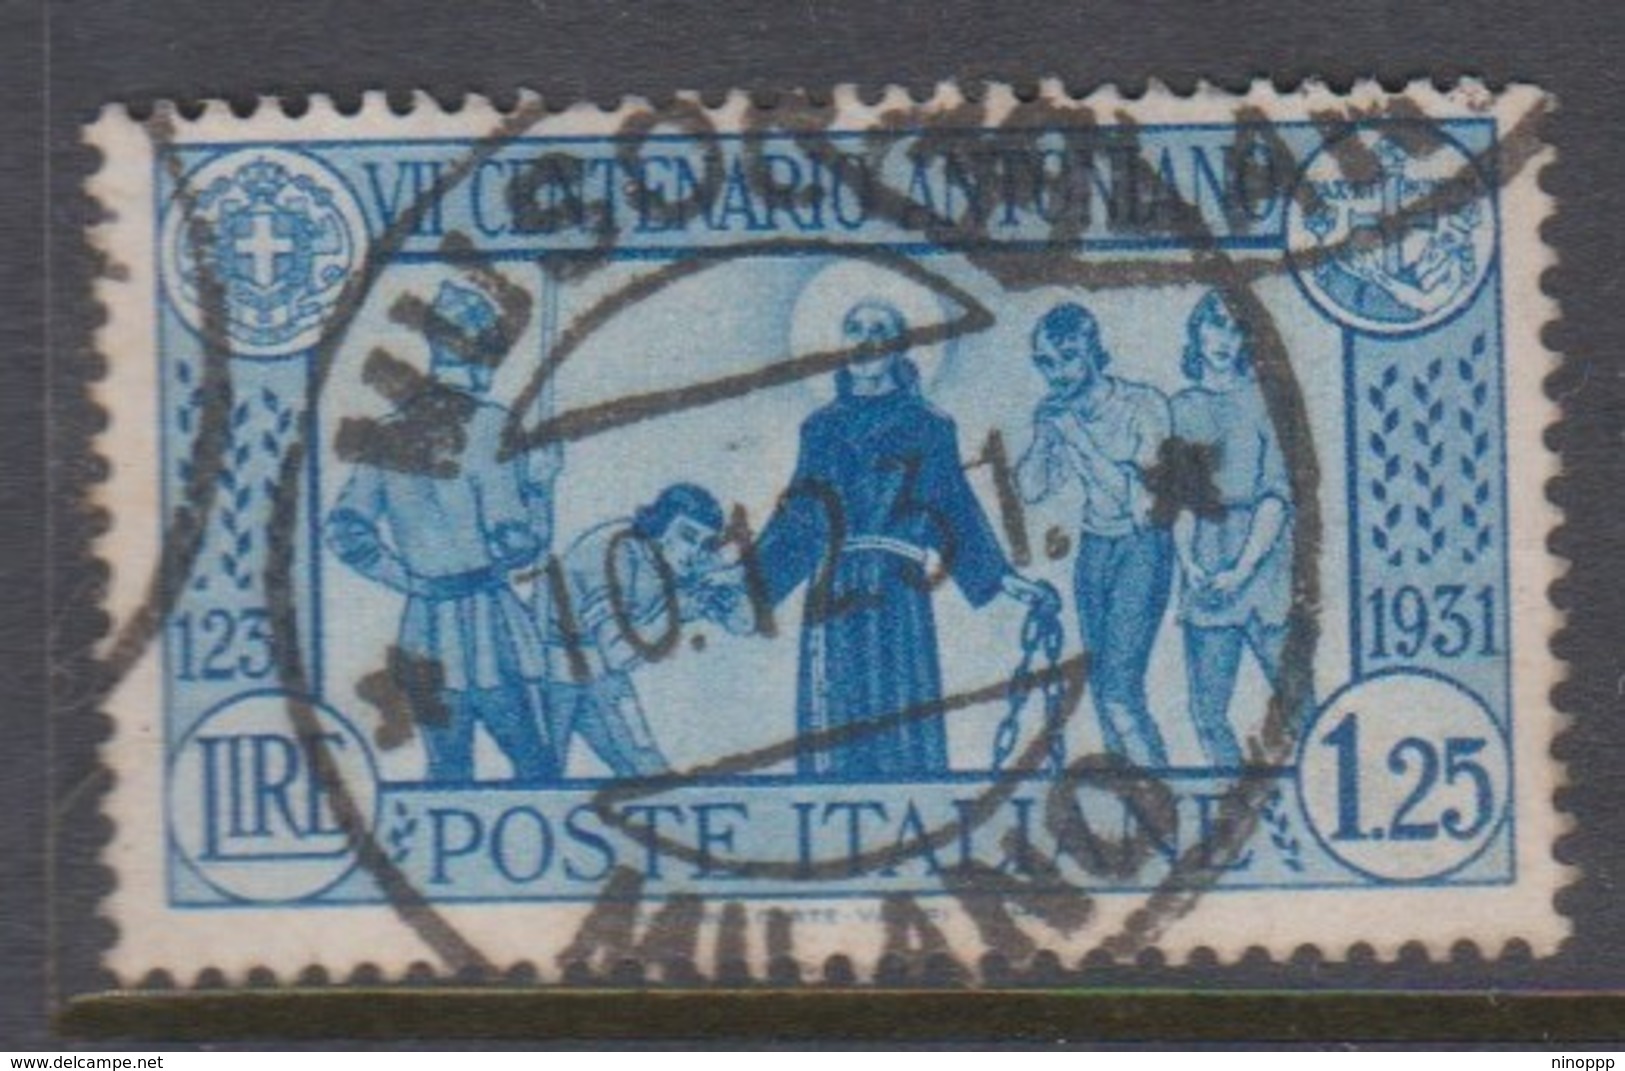 Italy S 297 1931 7th Centenary Death Of St Anthony Of Padua,lire 1,25 Blue,used - Used